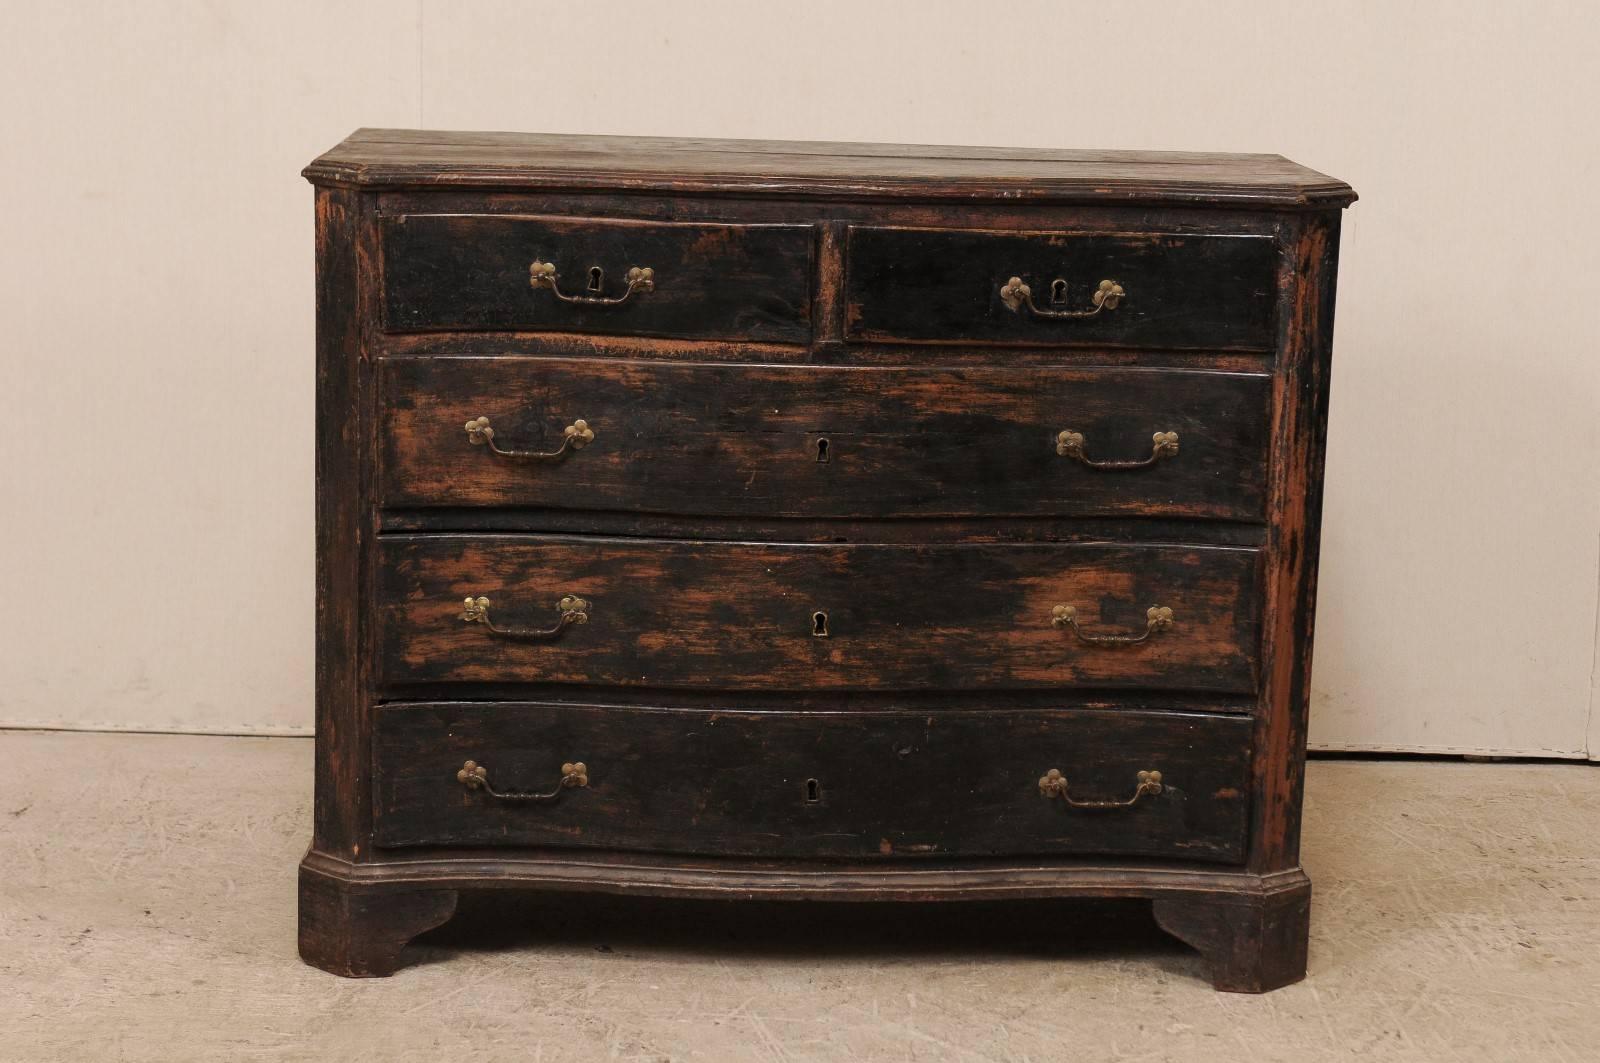 An 18th century Italian five-drawer wood chest. This antique Italian commode has a slightly bowed front with canted side posts, giving it a subtly curvy shape. There are two half drawers over three full drawers, each with rosette mounts and bail